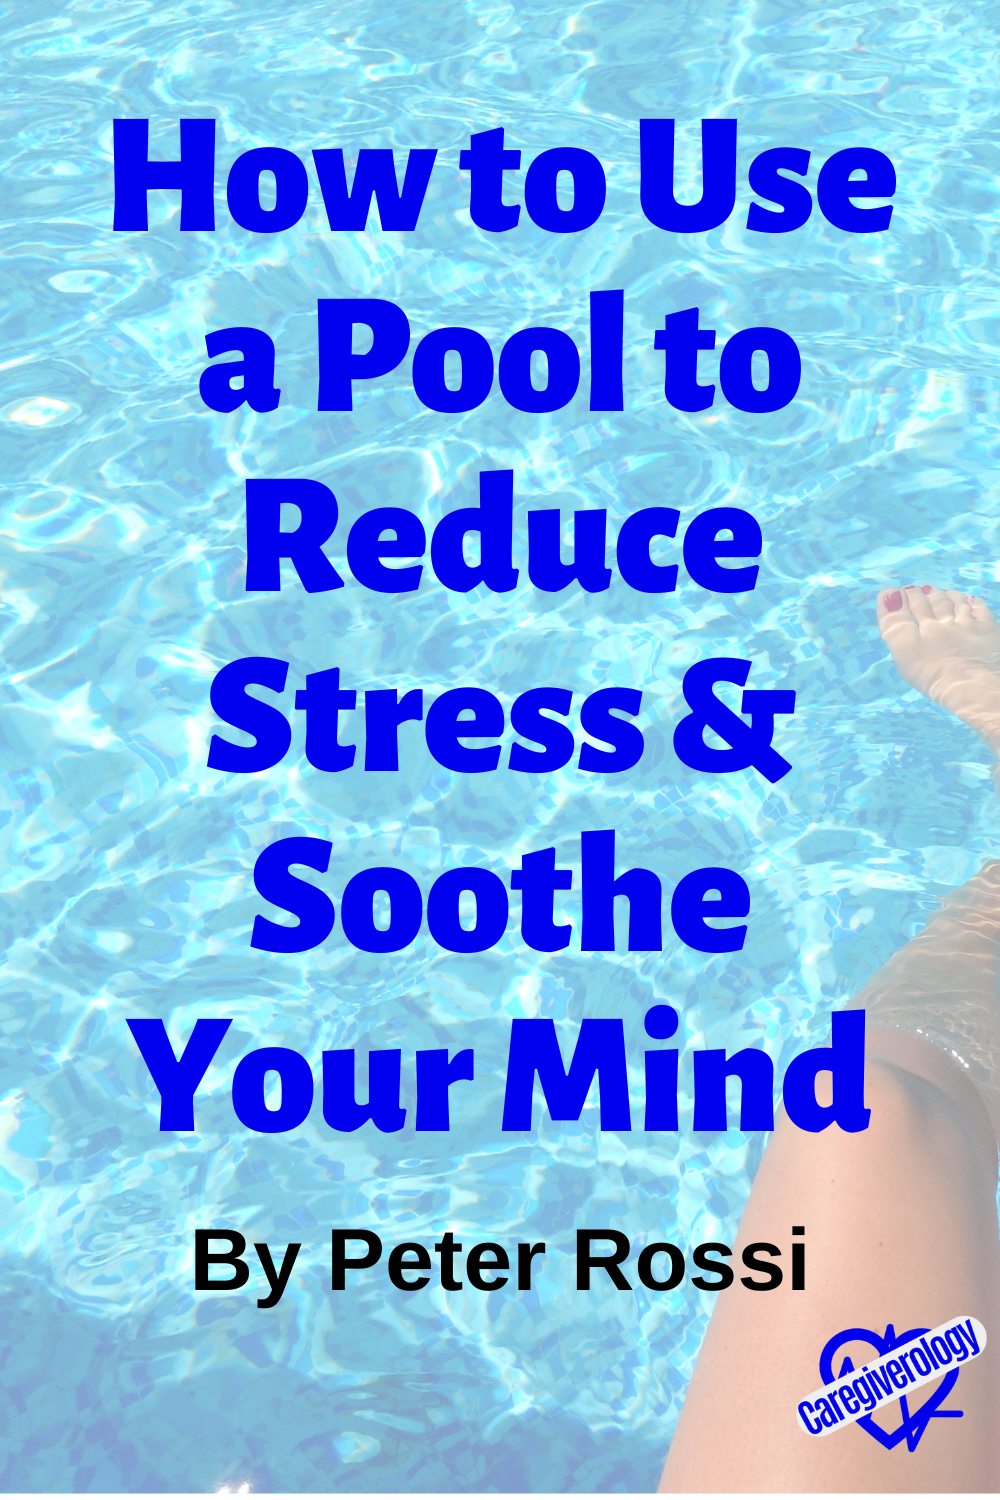 How to Use a Pool to Reduce Stress and Soothe Your Mind